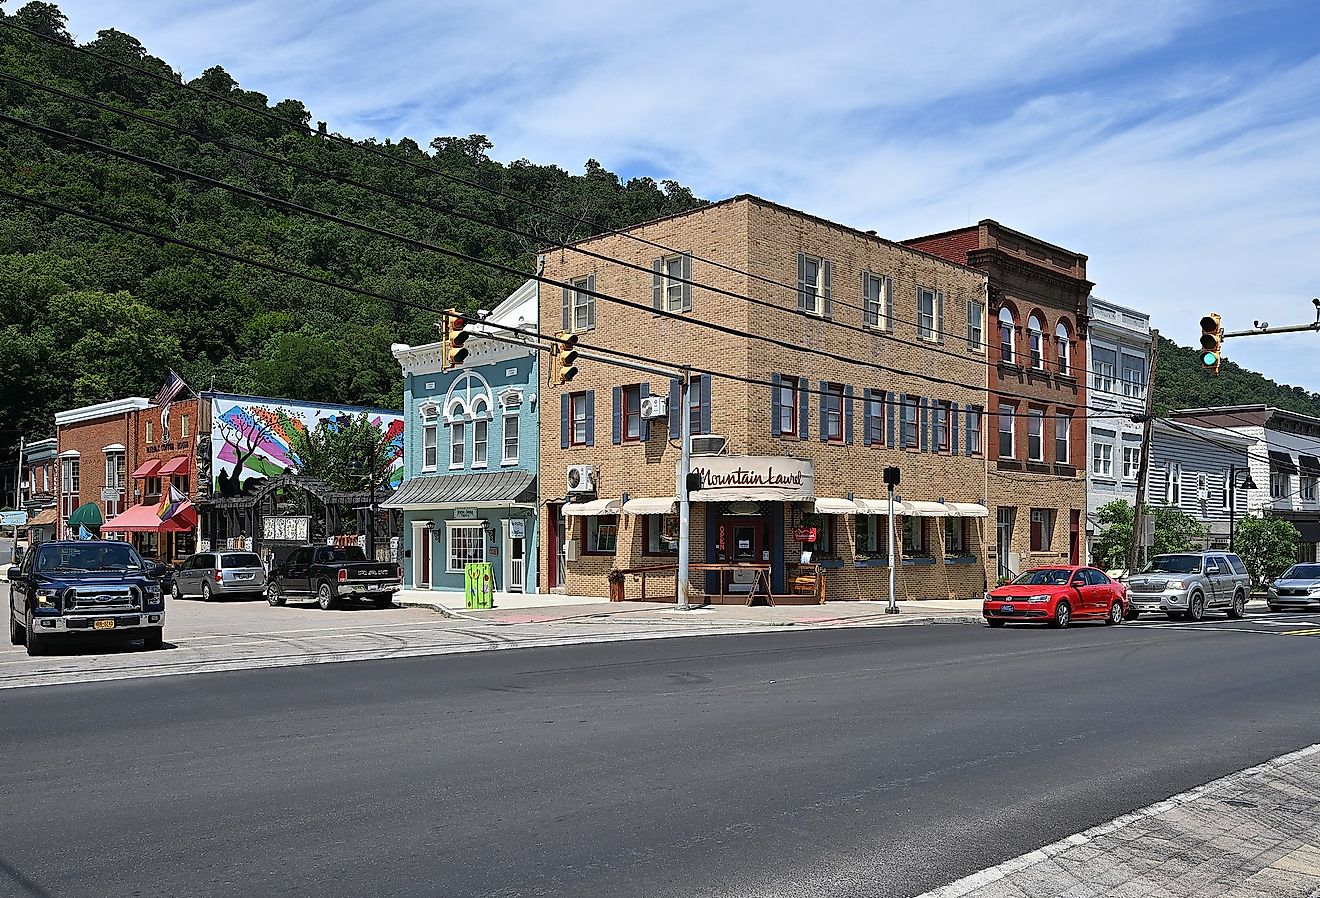 Town square in Berkeley Springs, West Virginia. Image credit G. Edward Johnson, CC BY 4.0 <https://creativecommons.org/licenses/by/4.0>, via Wikimedia Commons